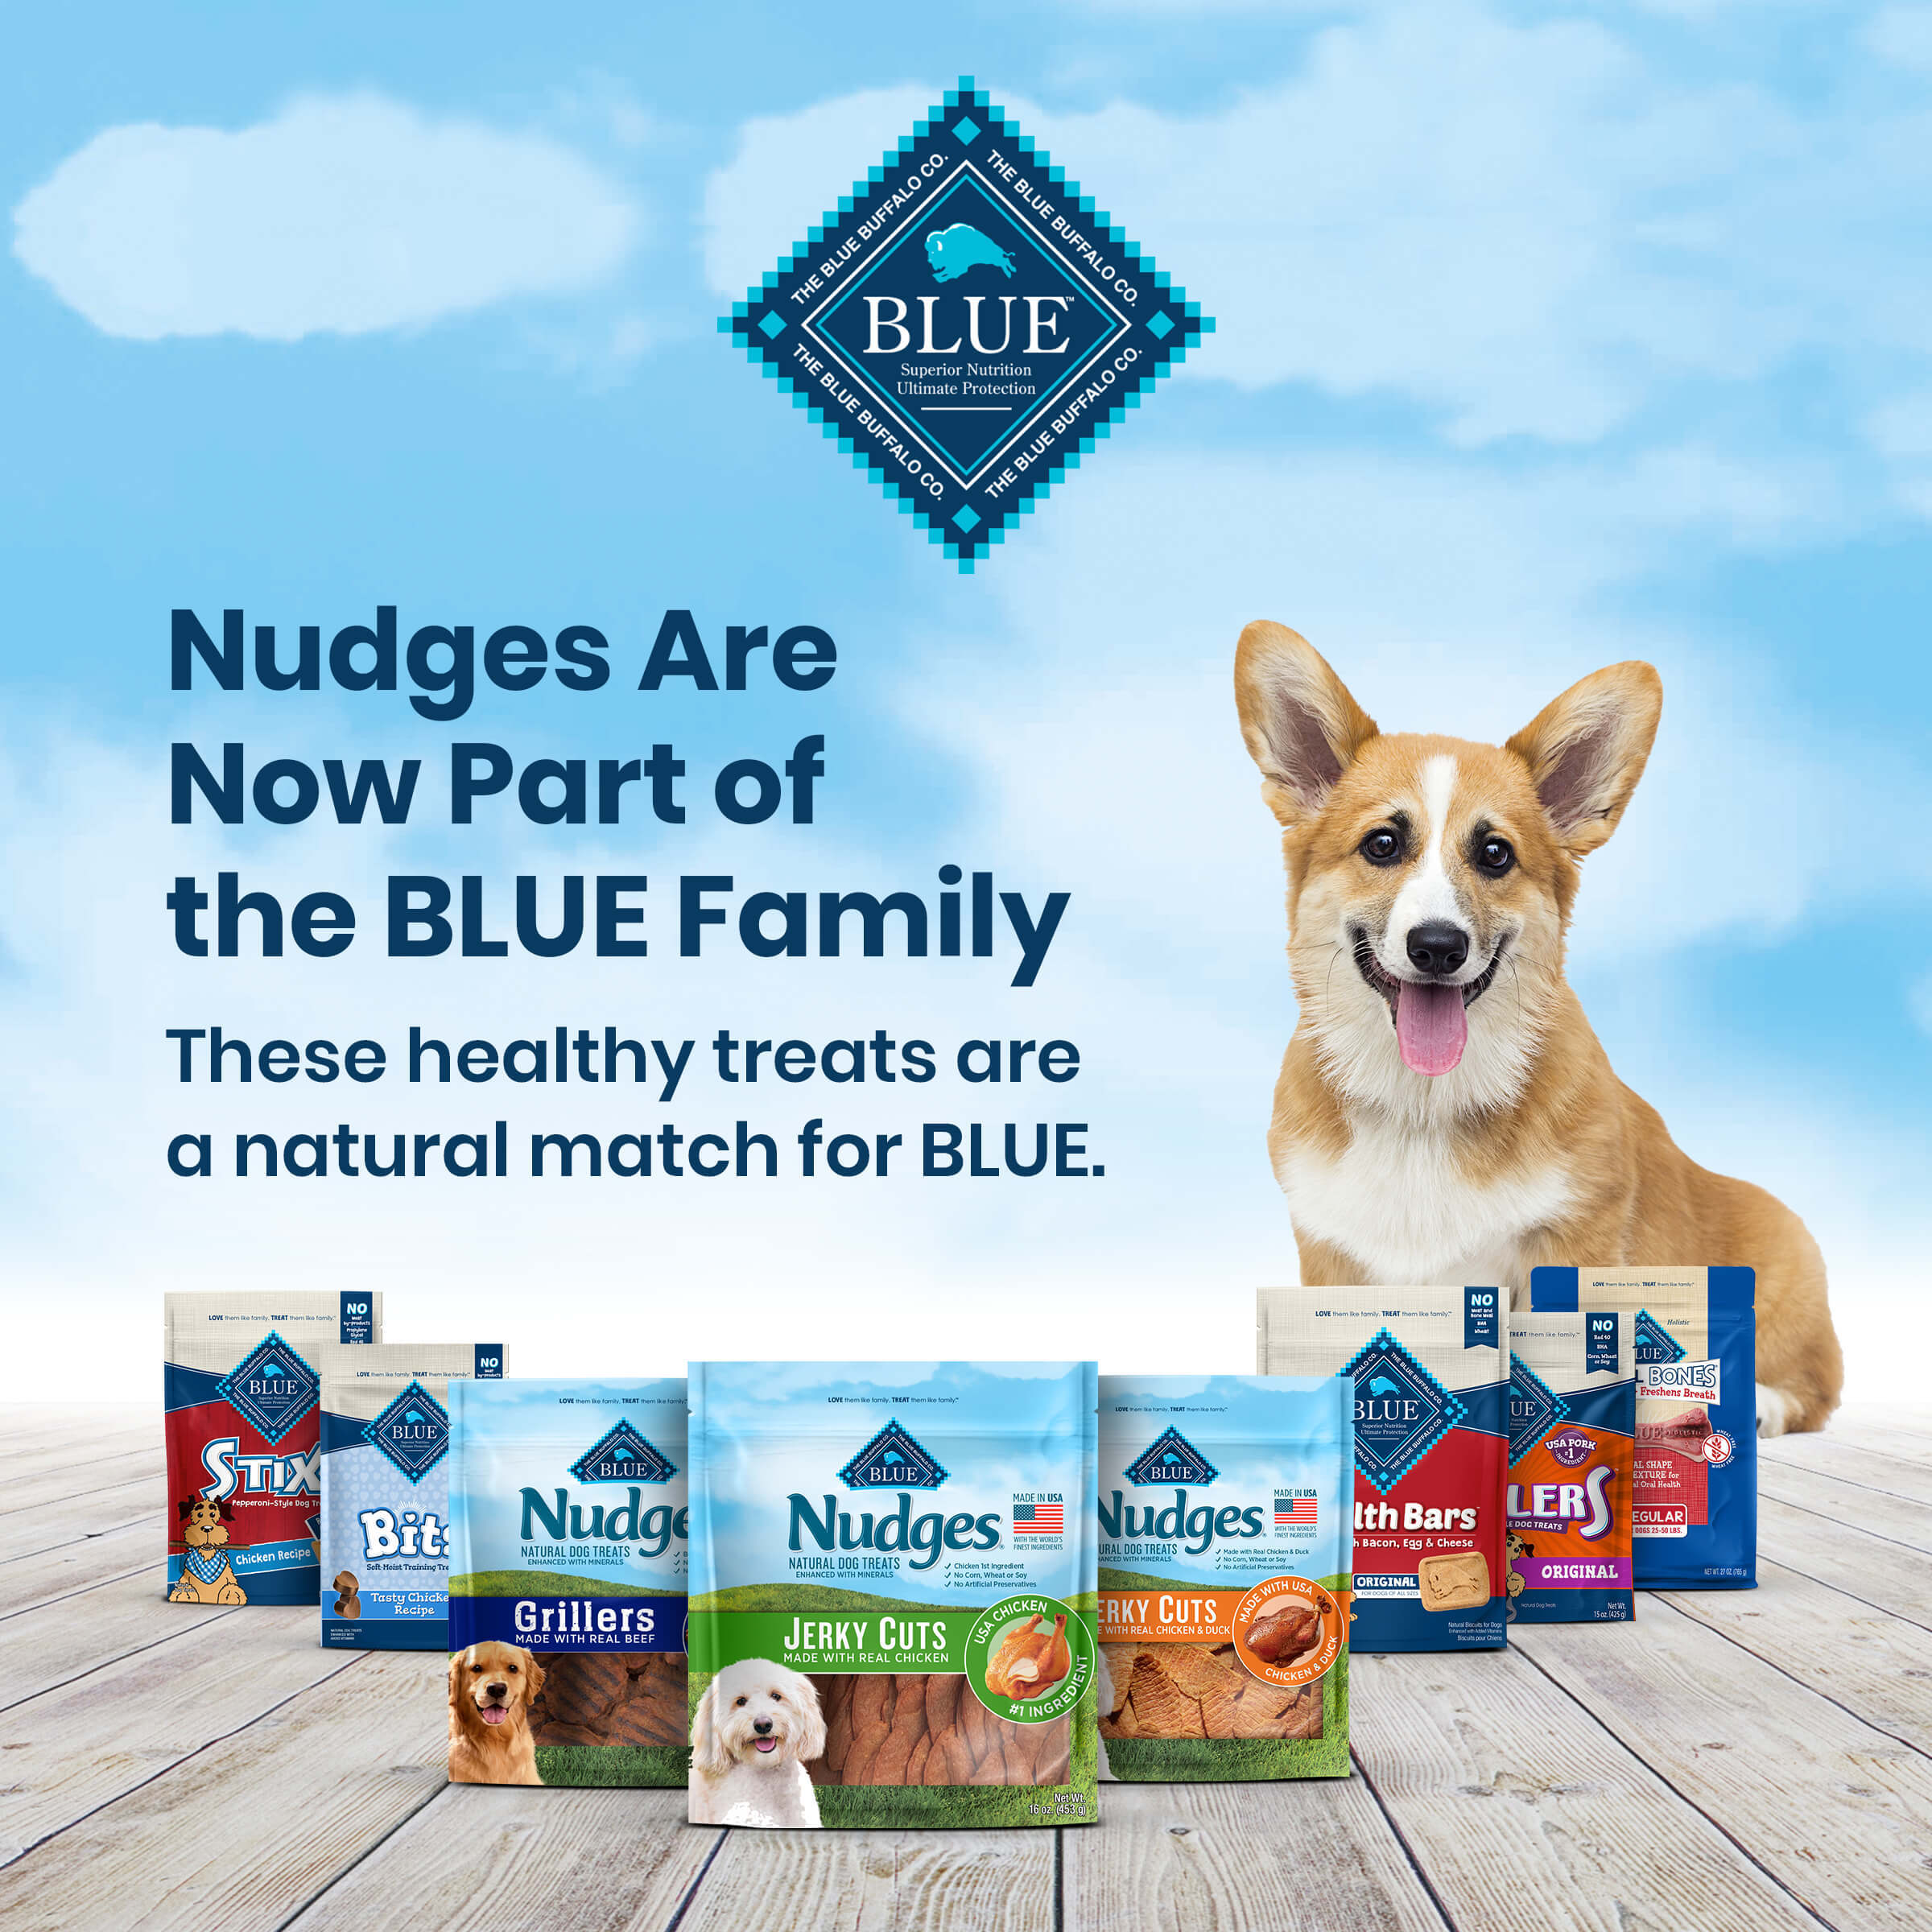 Blue Buffalo Nudges Jerky Cuts Natural Dog Treats, Chicken and Duck, 16oz Bag - image 2 of 3